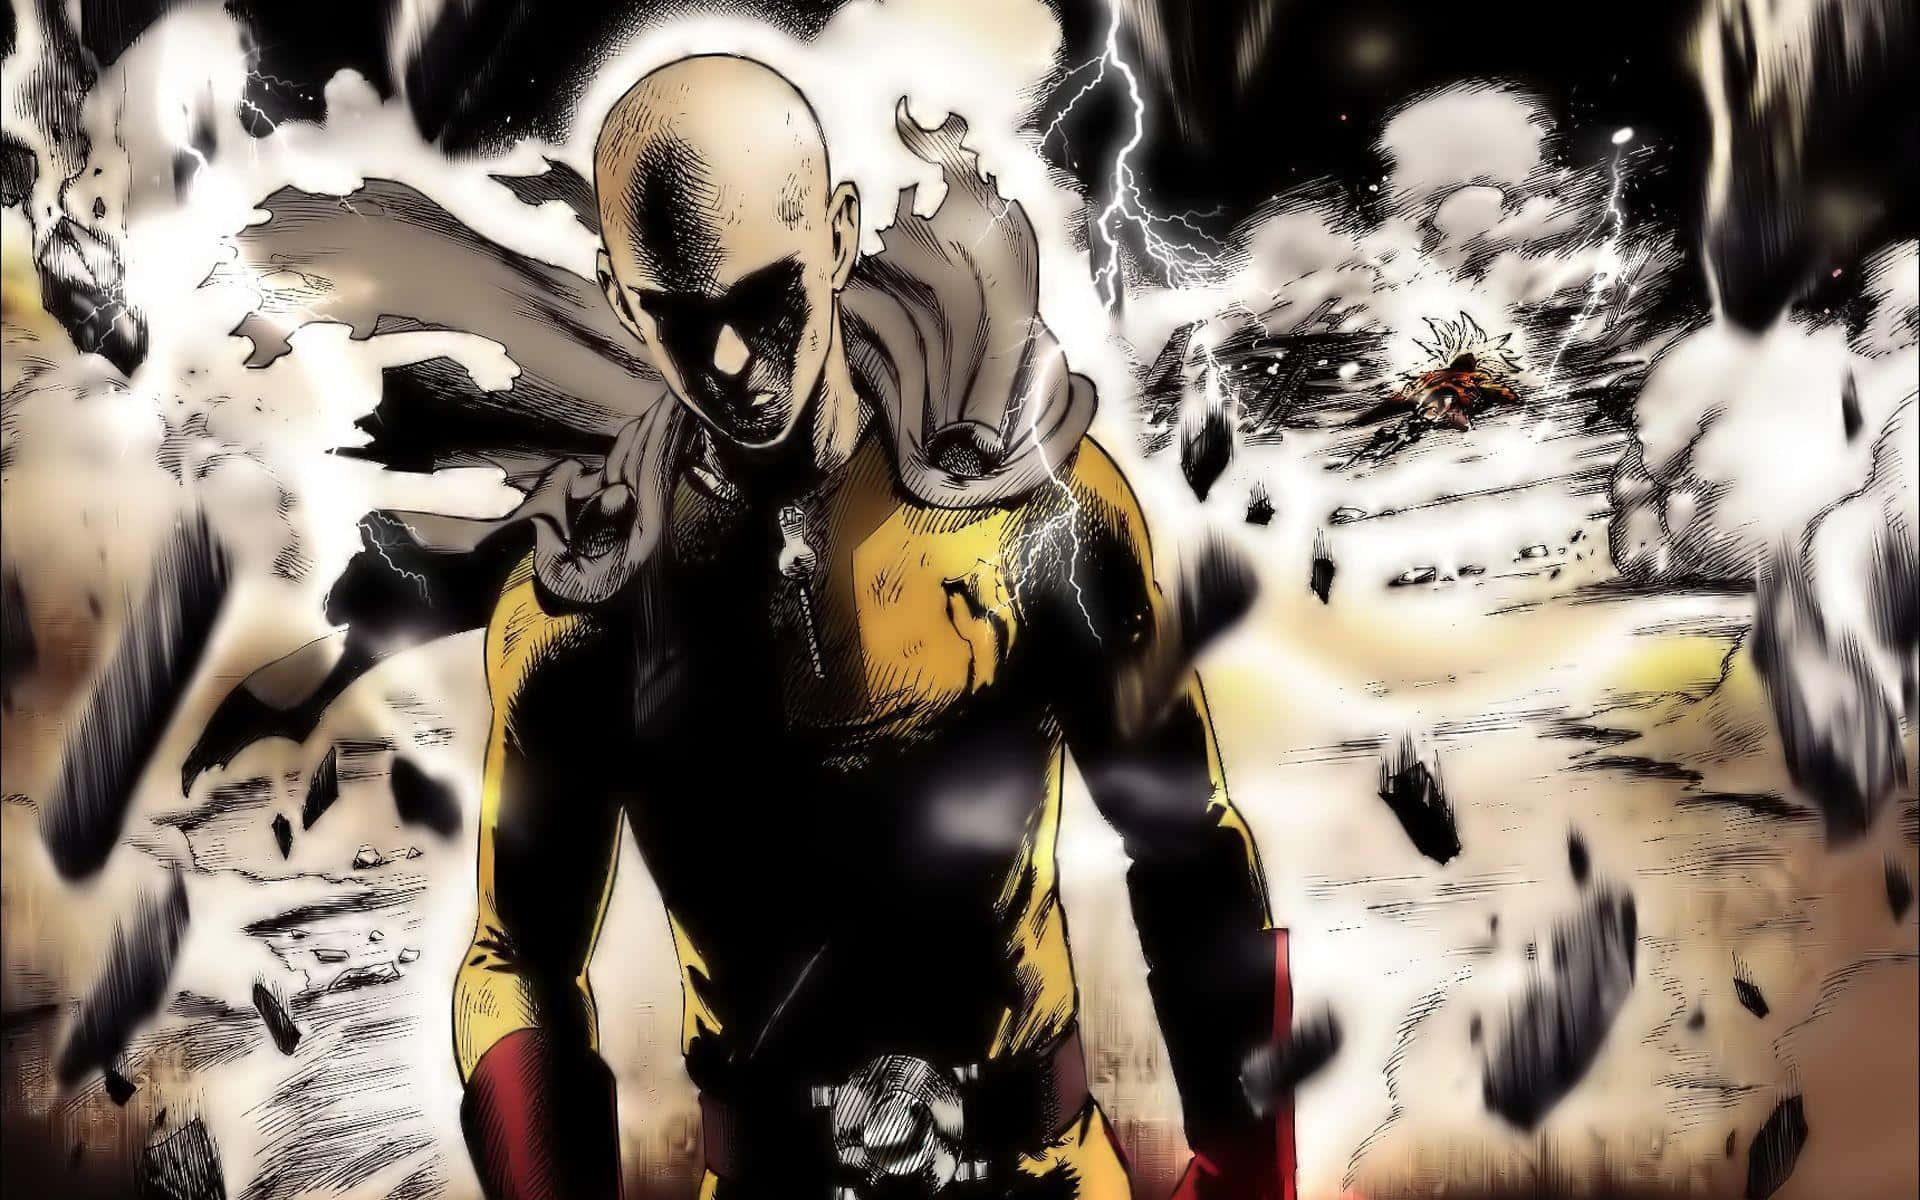 "Saitama, the hero of justice and hero for all, delivers one punch!"